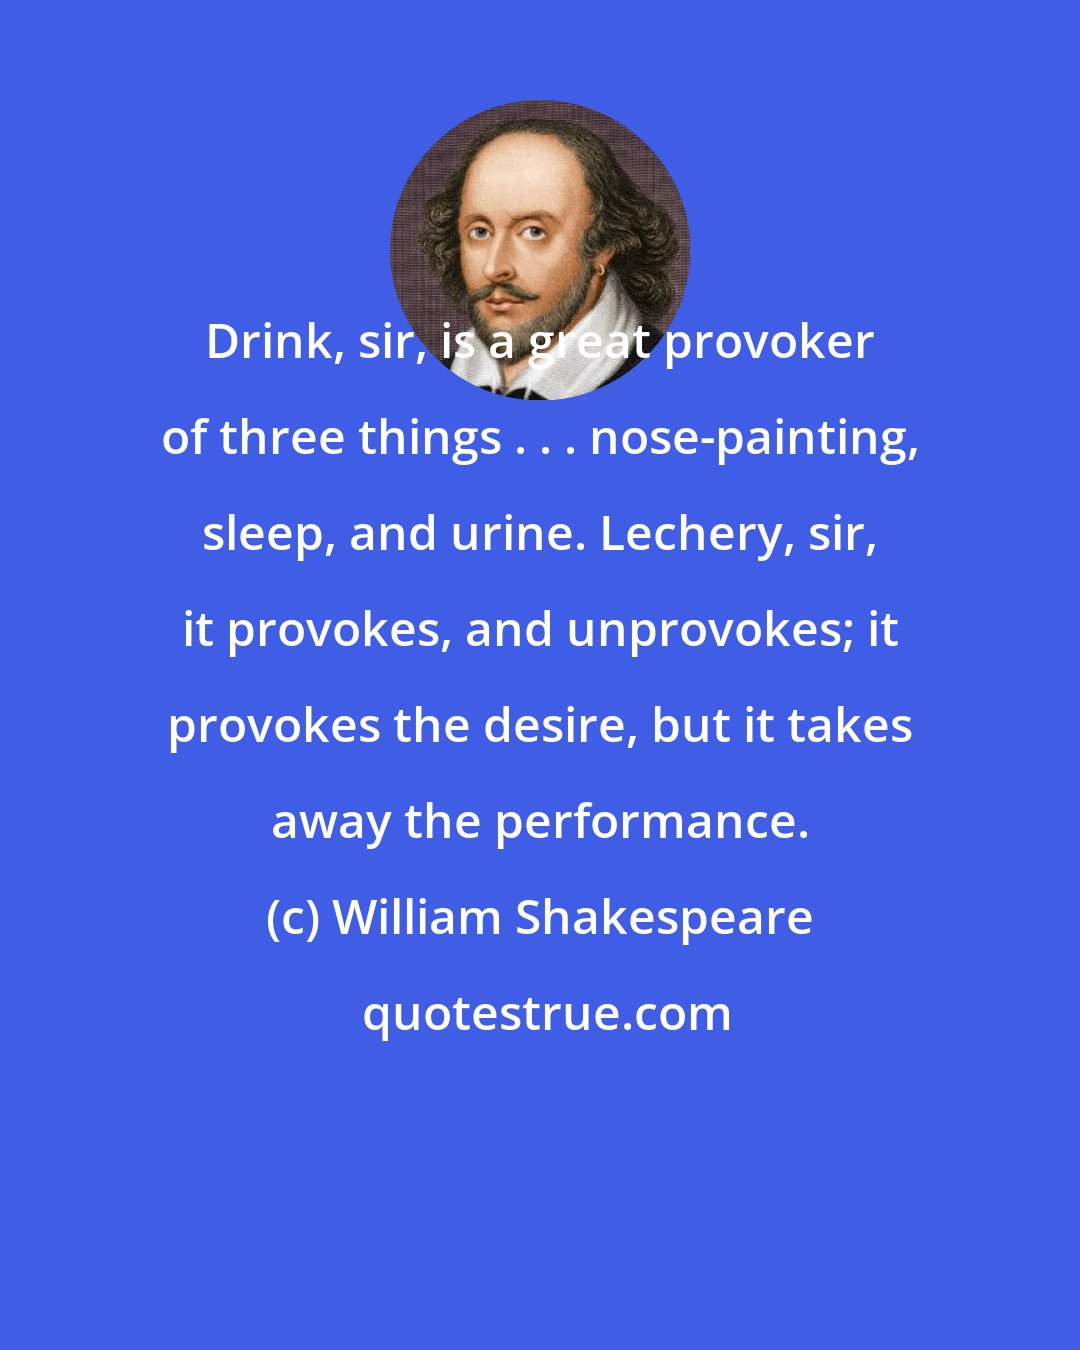 William Shakespeare: Drink, sir, is a great provoker of three things . . . nose-painting, sleep, and urine. Lechery, sir, it provokes, and unprovokes; it provokes the desire, but it takes away the performance.